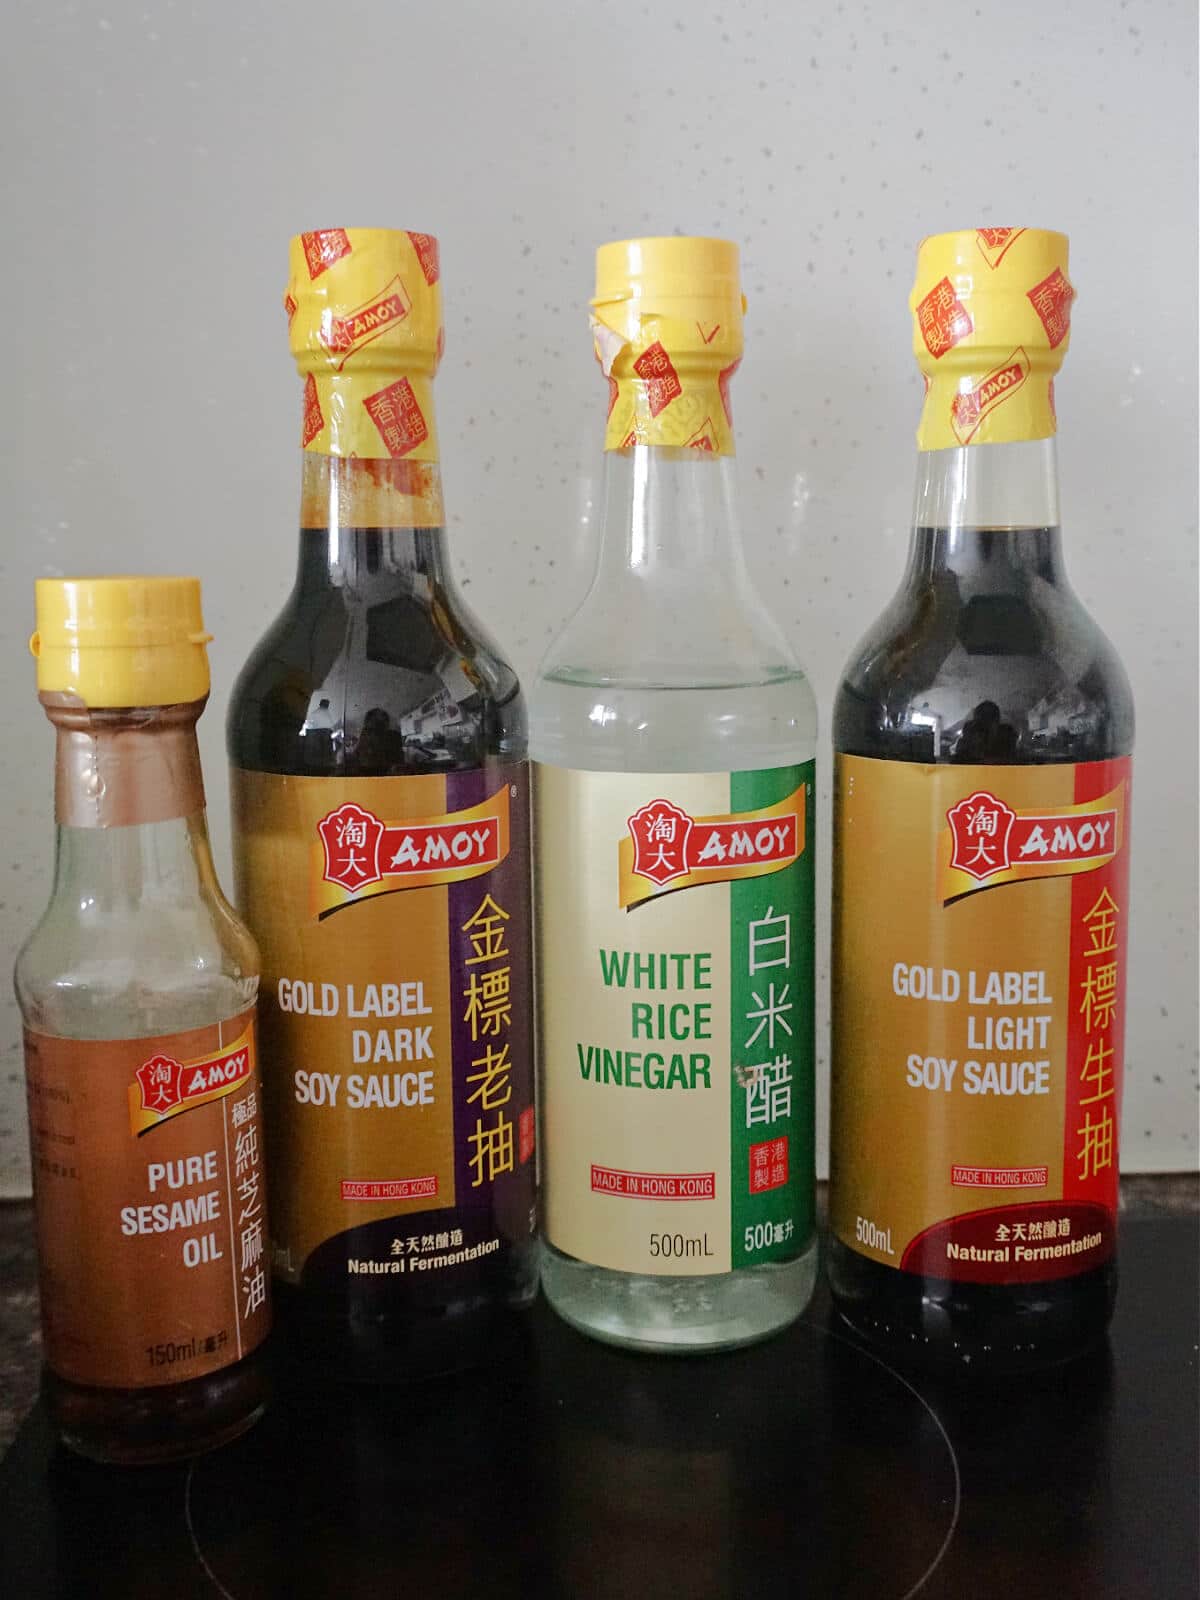 A picture with the sauces needed to make homemade stir fry sauce